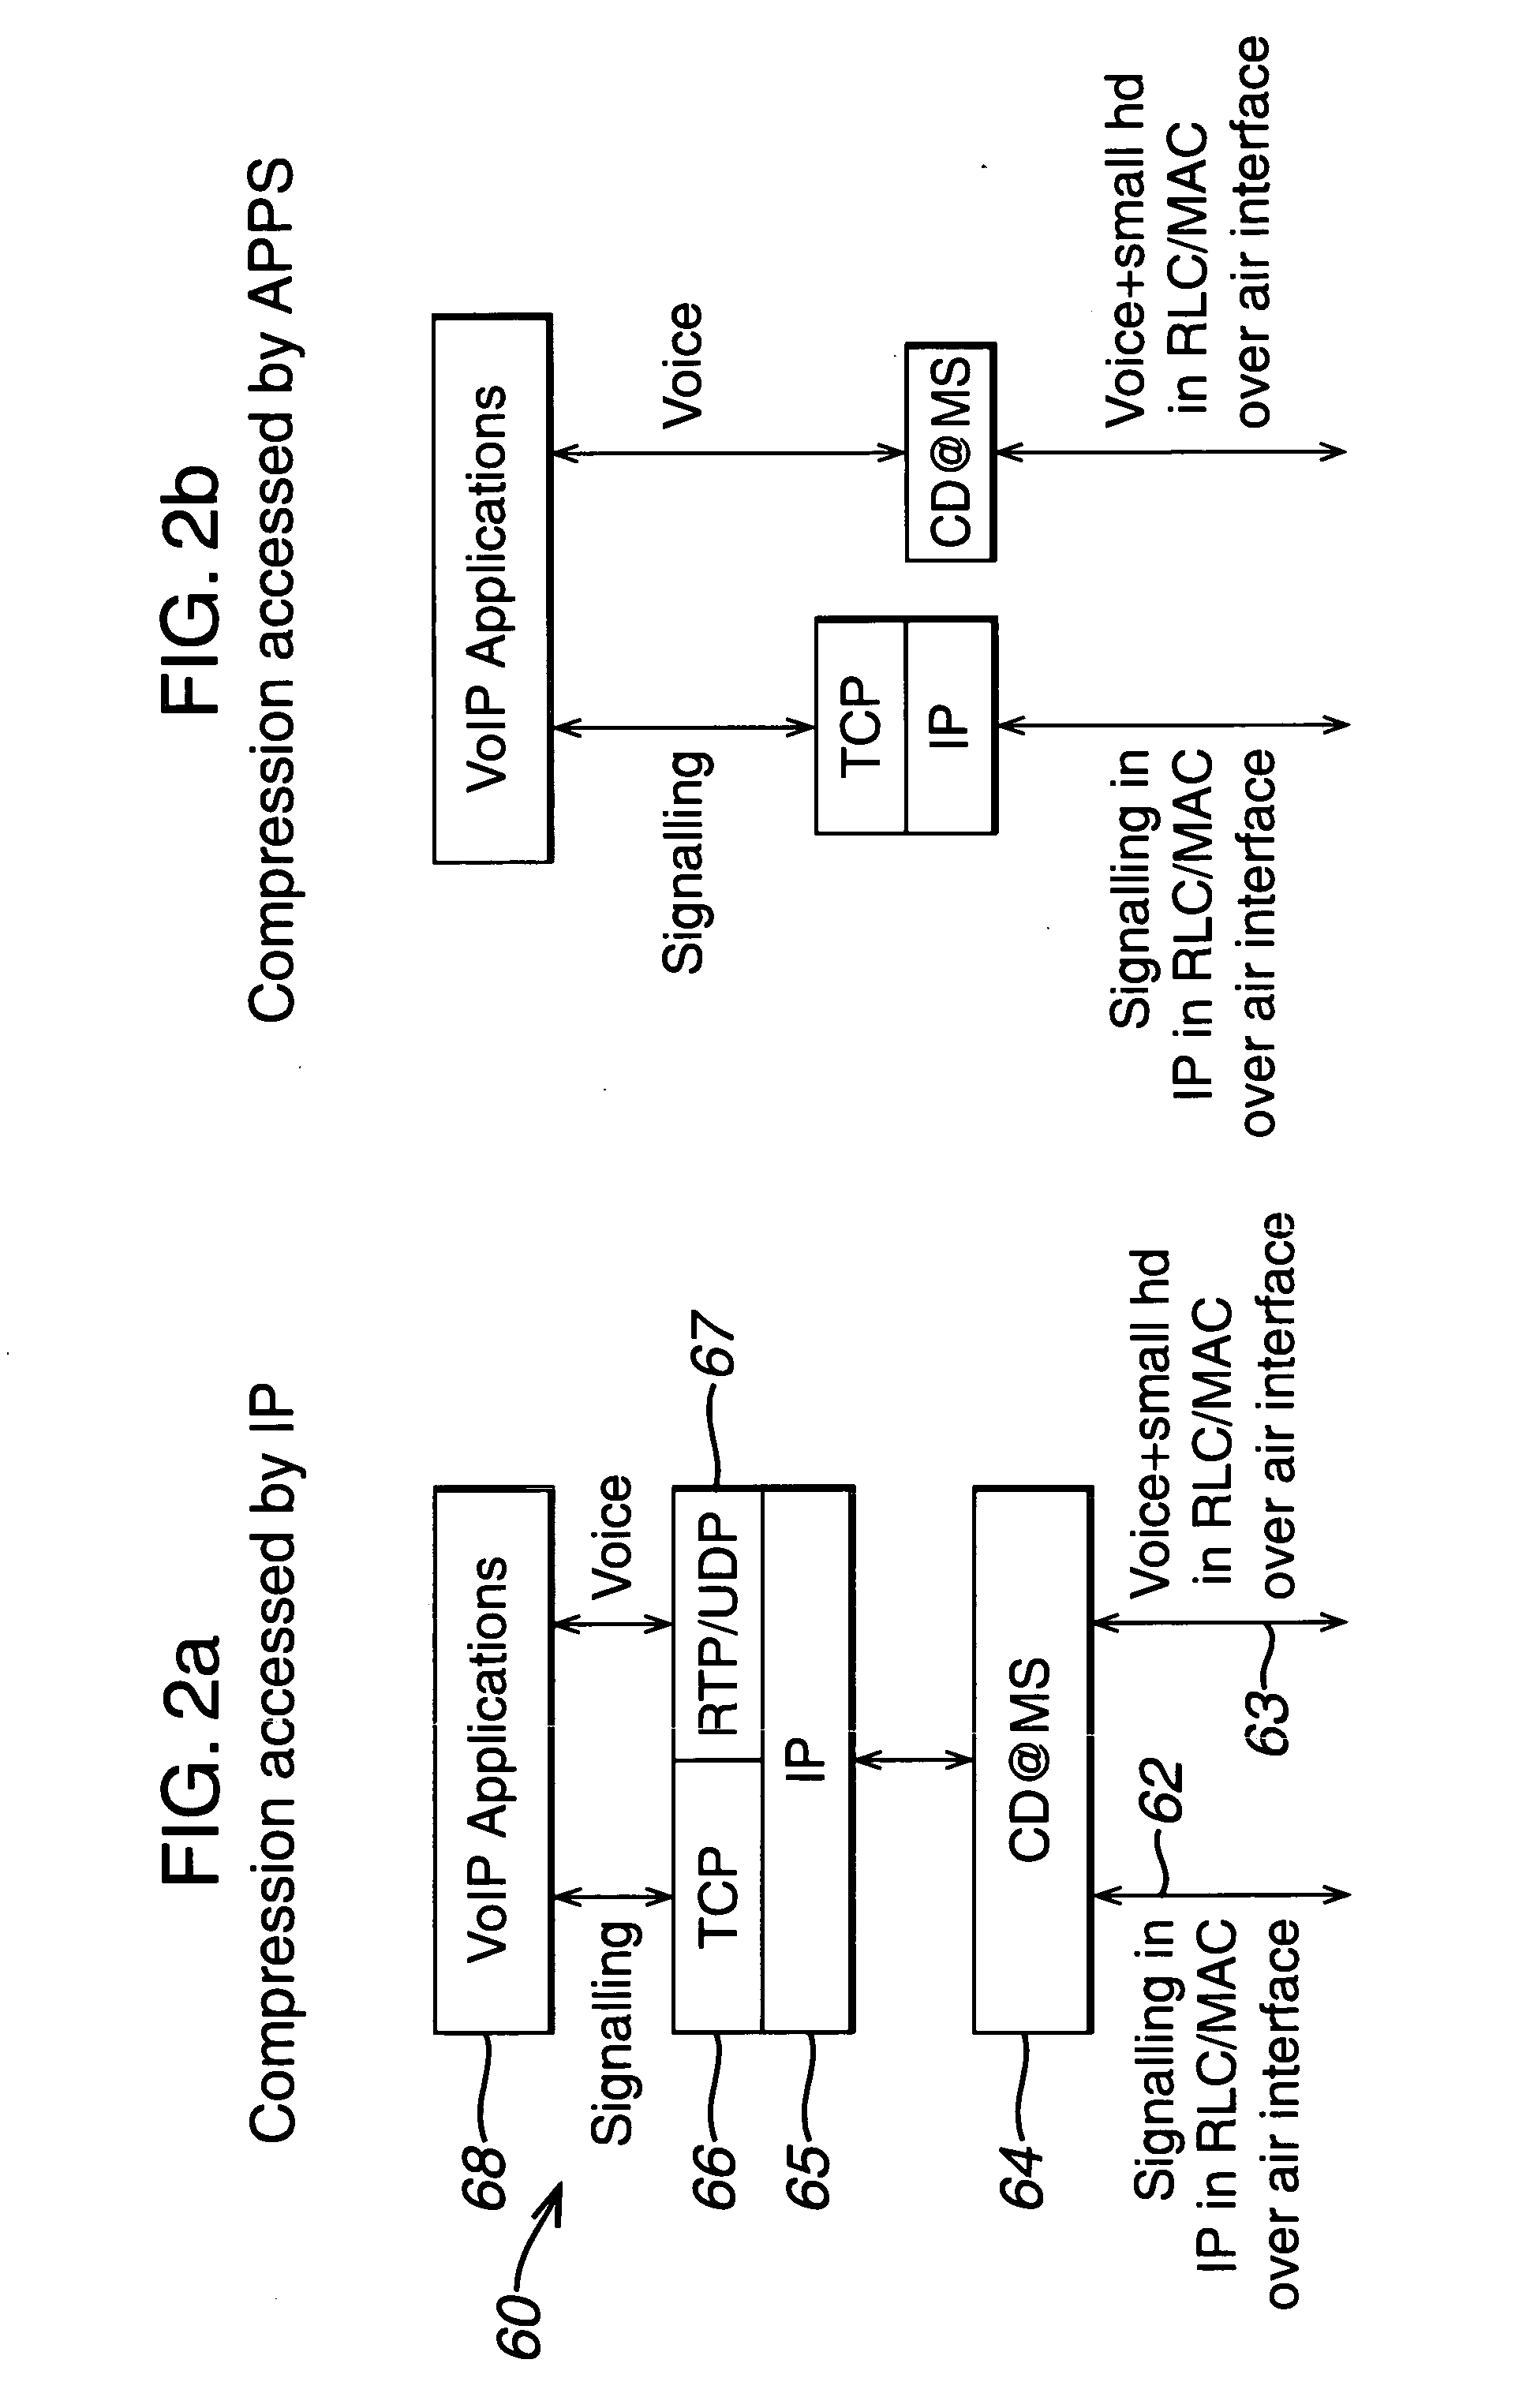 Method and apparatus for telecommunications using internet protocol